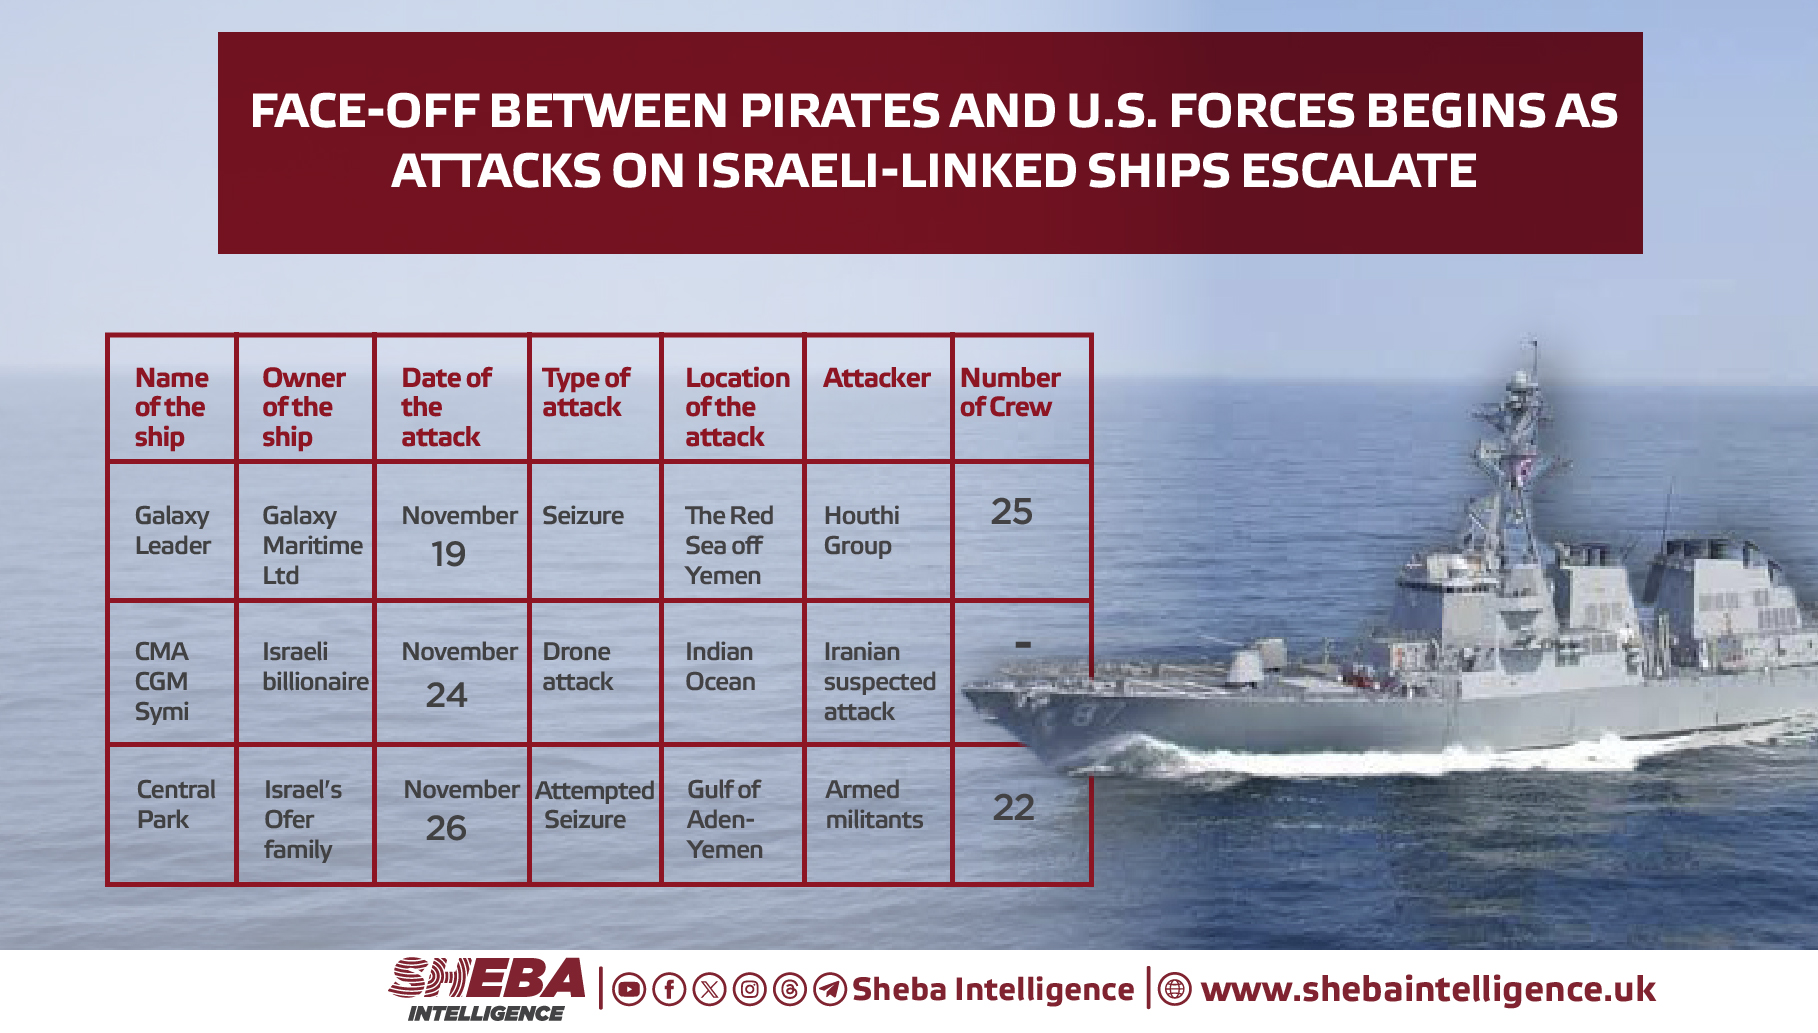 Face-off Between Pirates and U.S. Forces Begins as Attacks on Israeli-Linked Ships Escalate